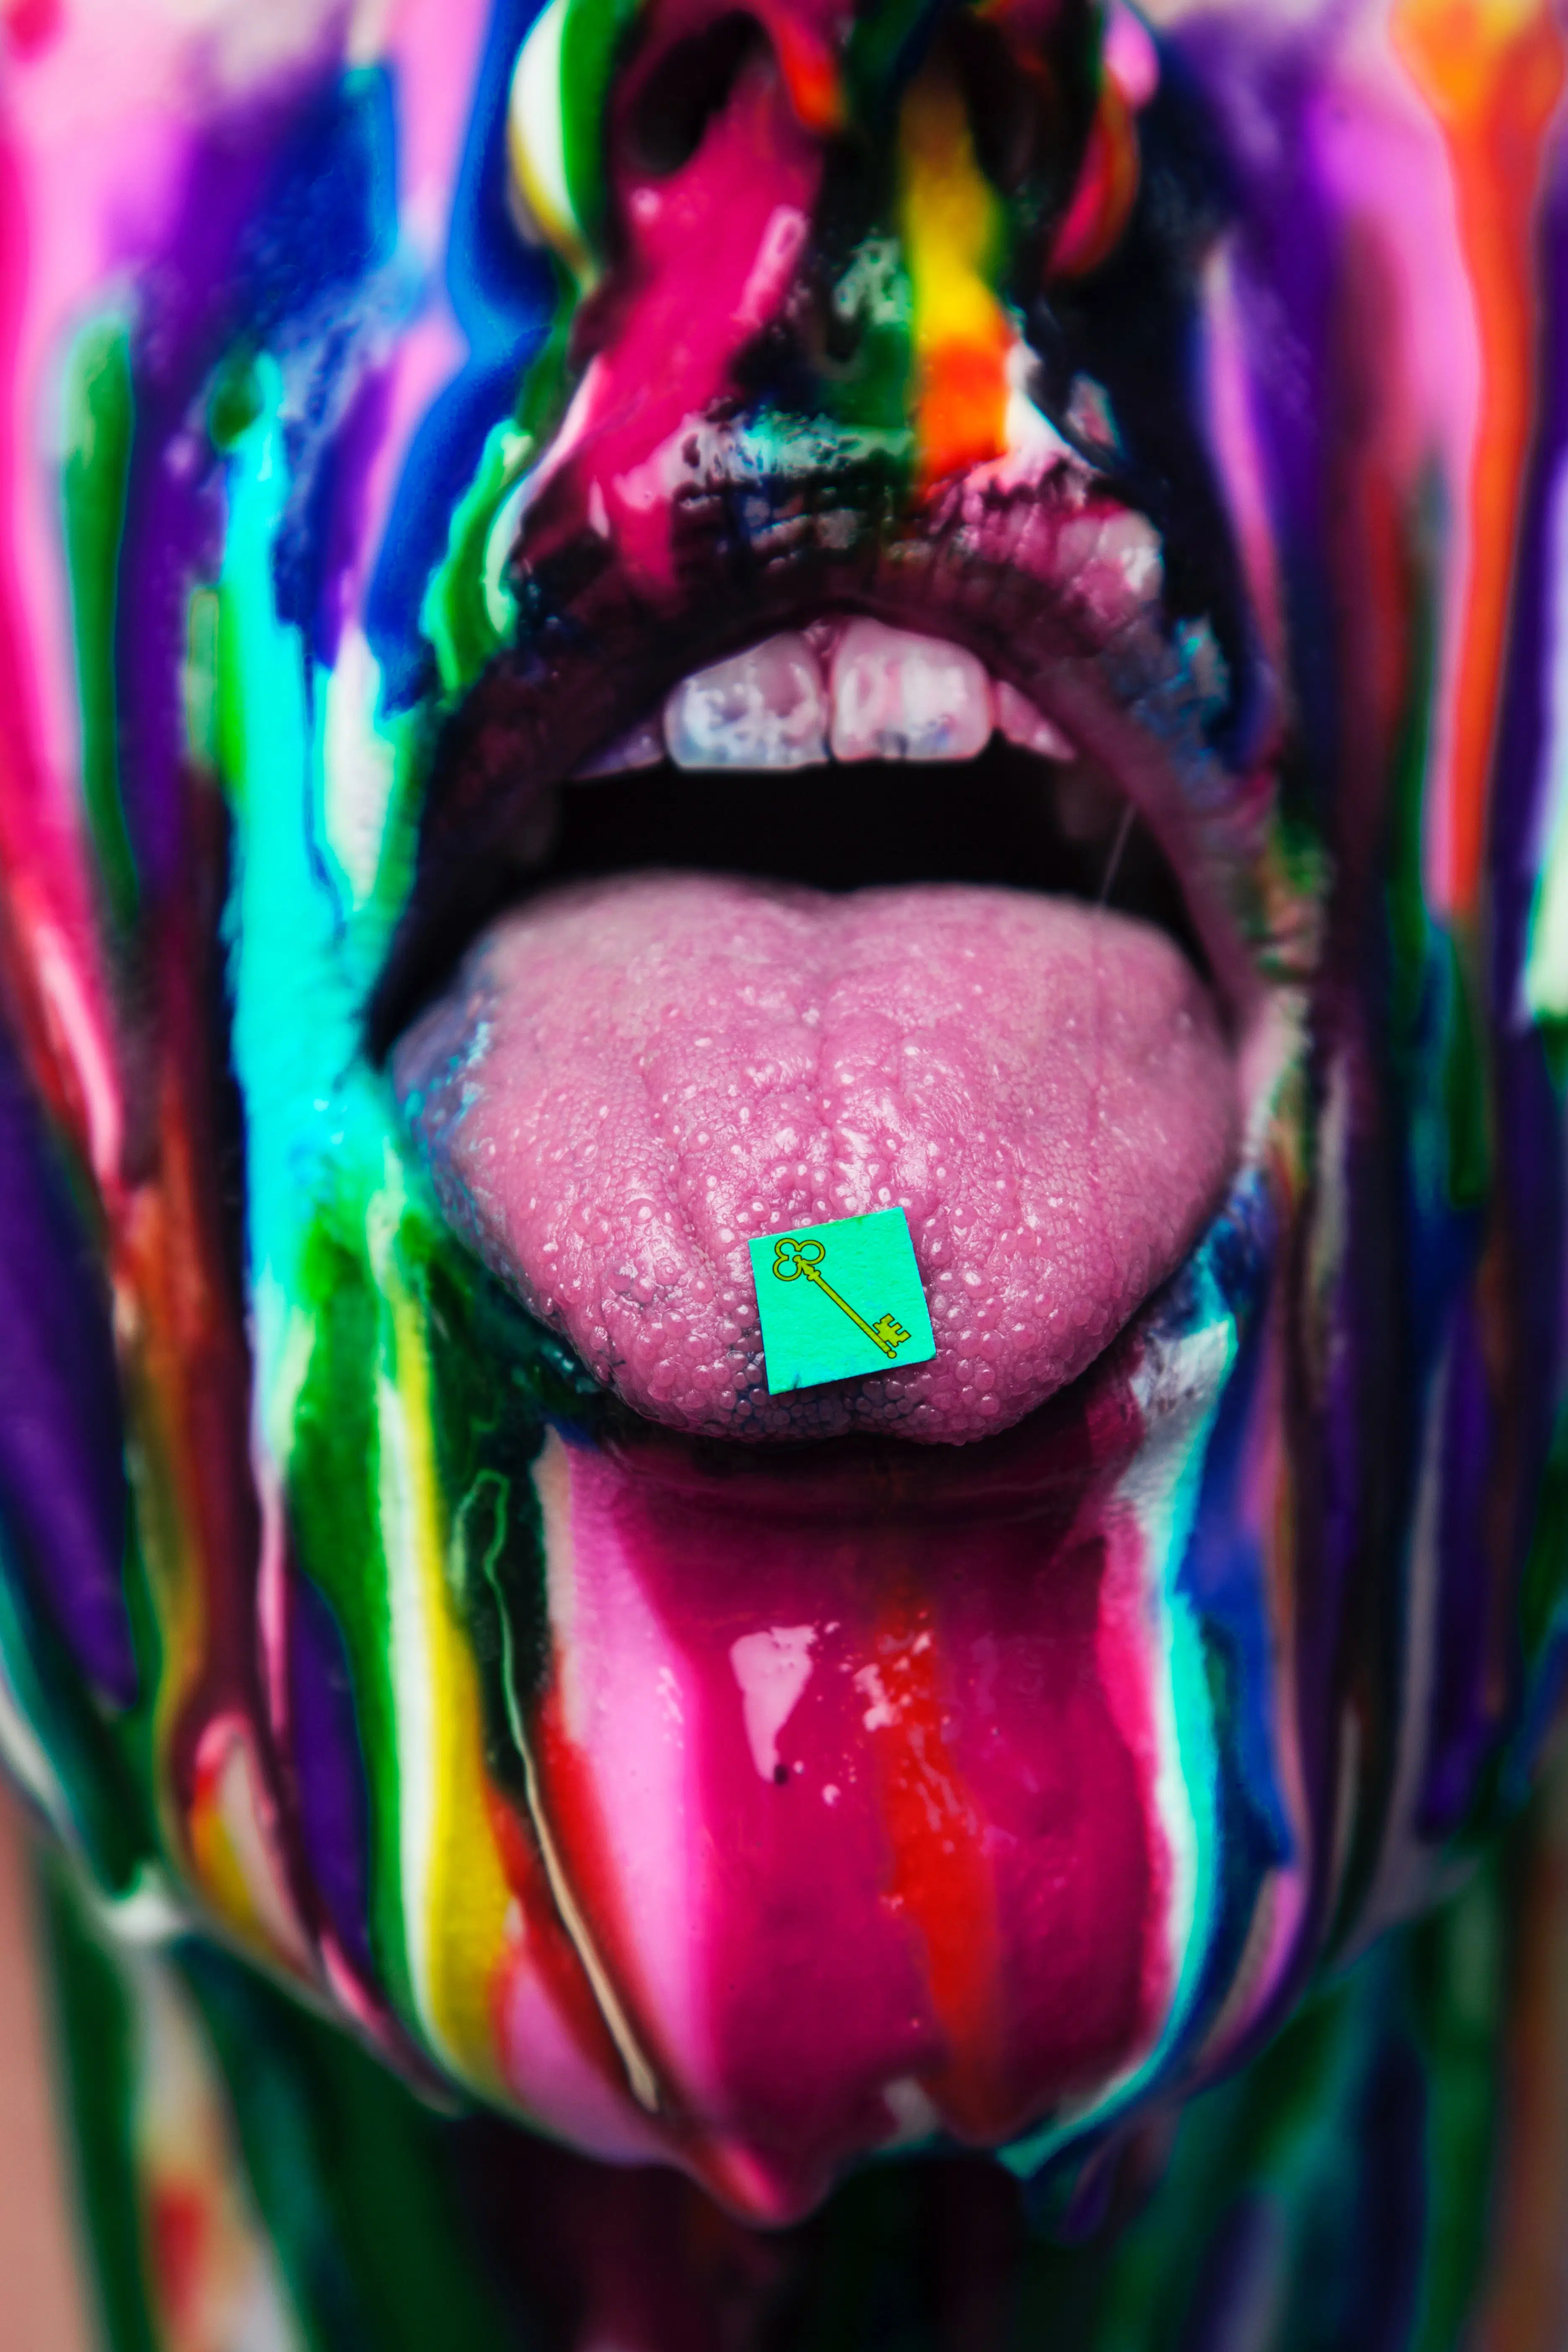 bottom half of a person's face, painted multiple colors, with their tongue sticking out and an acid tab on the tip of their tongue.